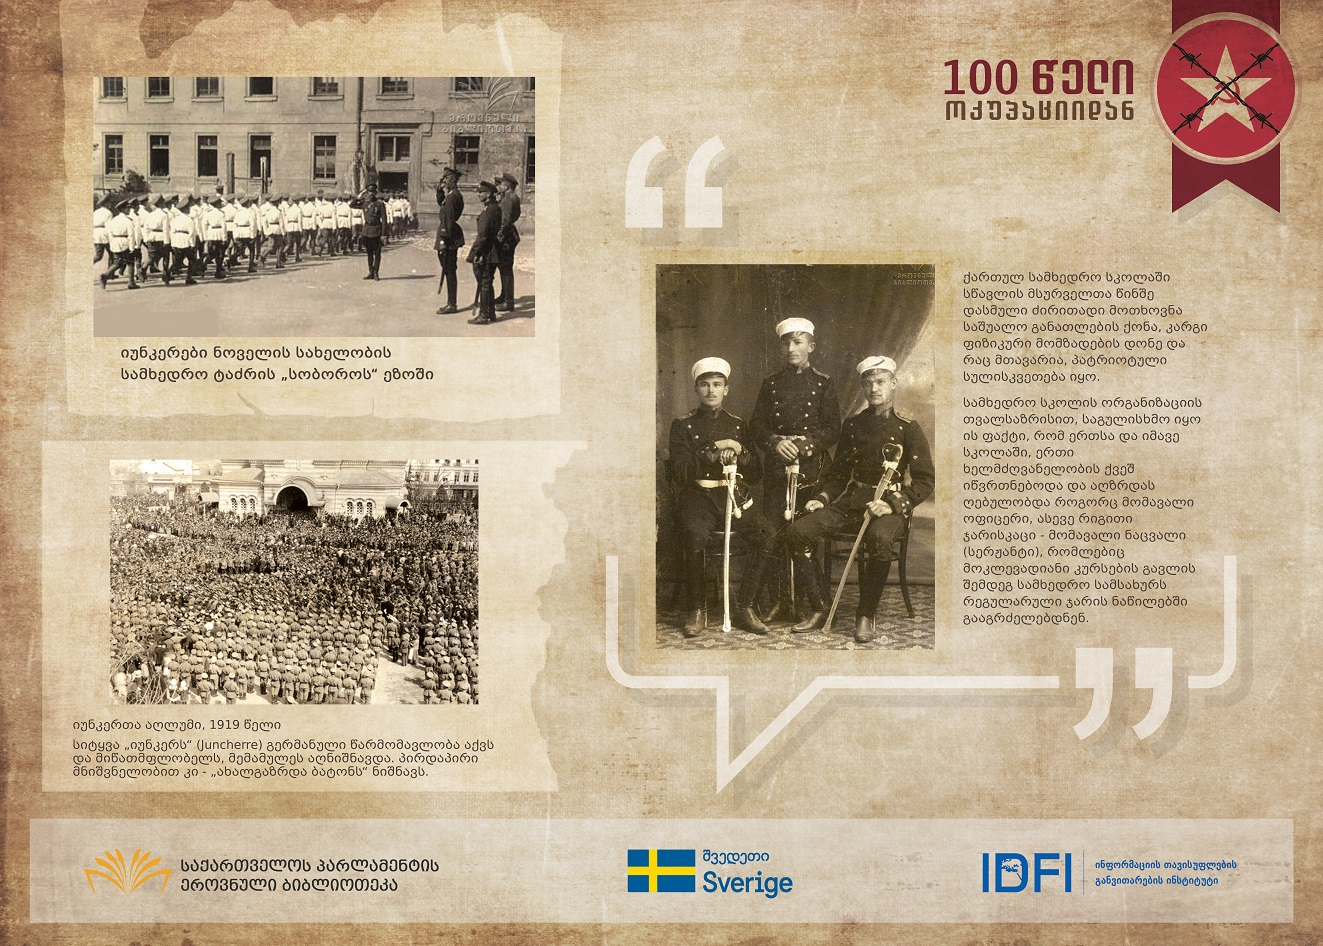 Exhibition Dedicated to the 100th Anniversary of the Occupation